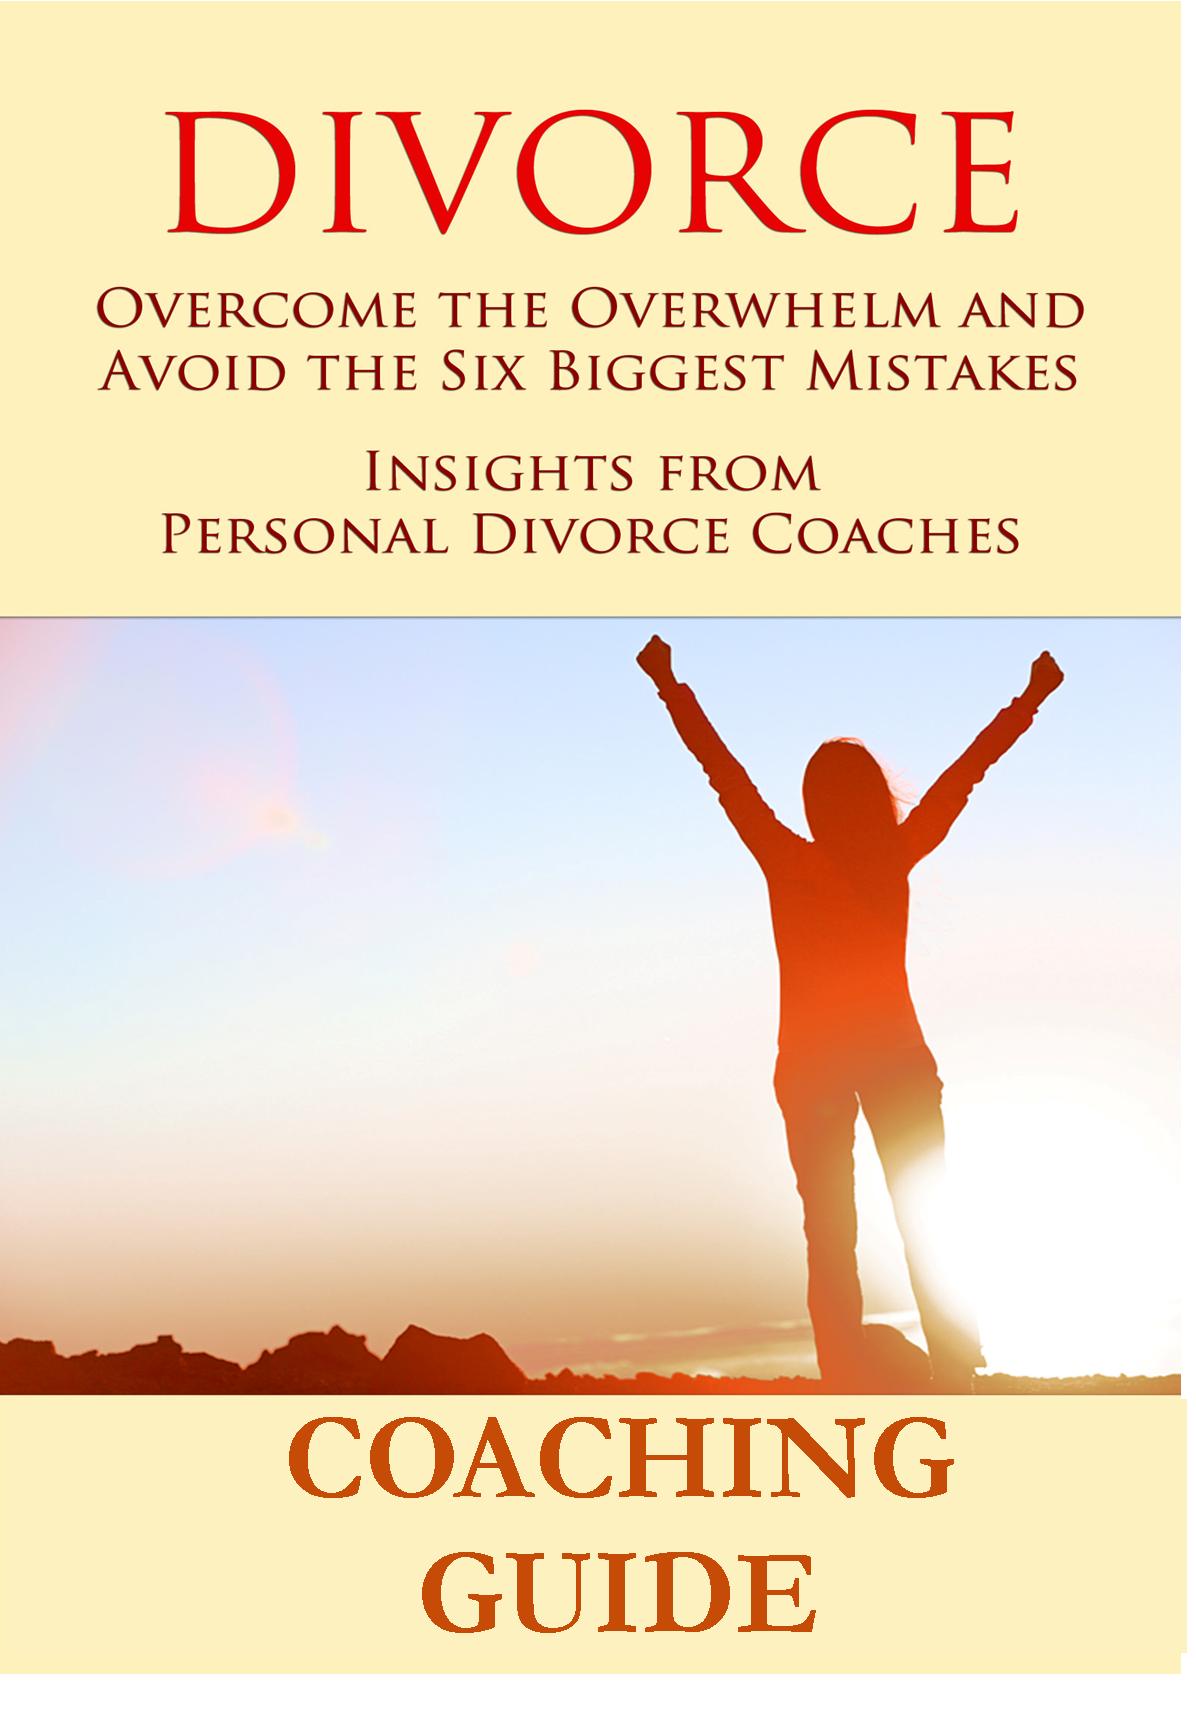 CDC Certified Divorce Coach® Announces a New Ready To Use Program for